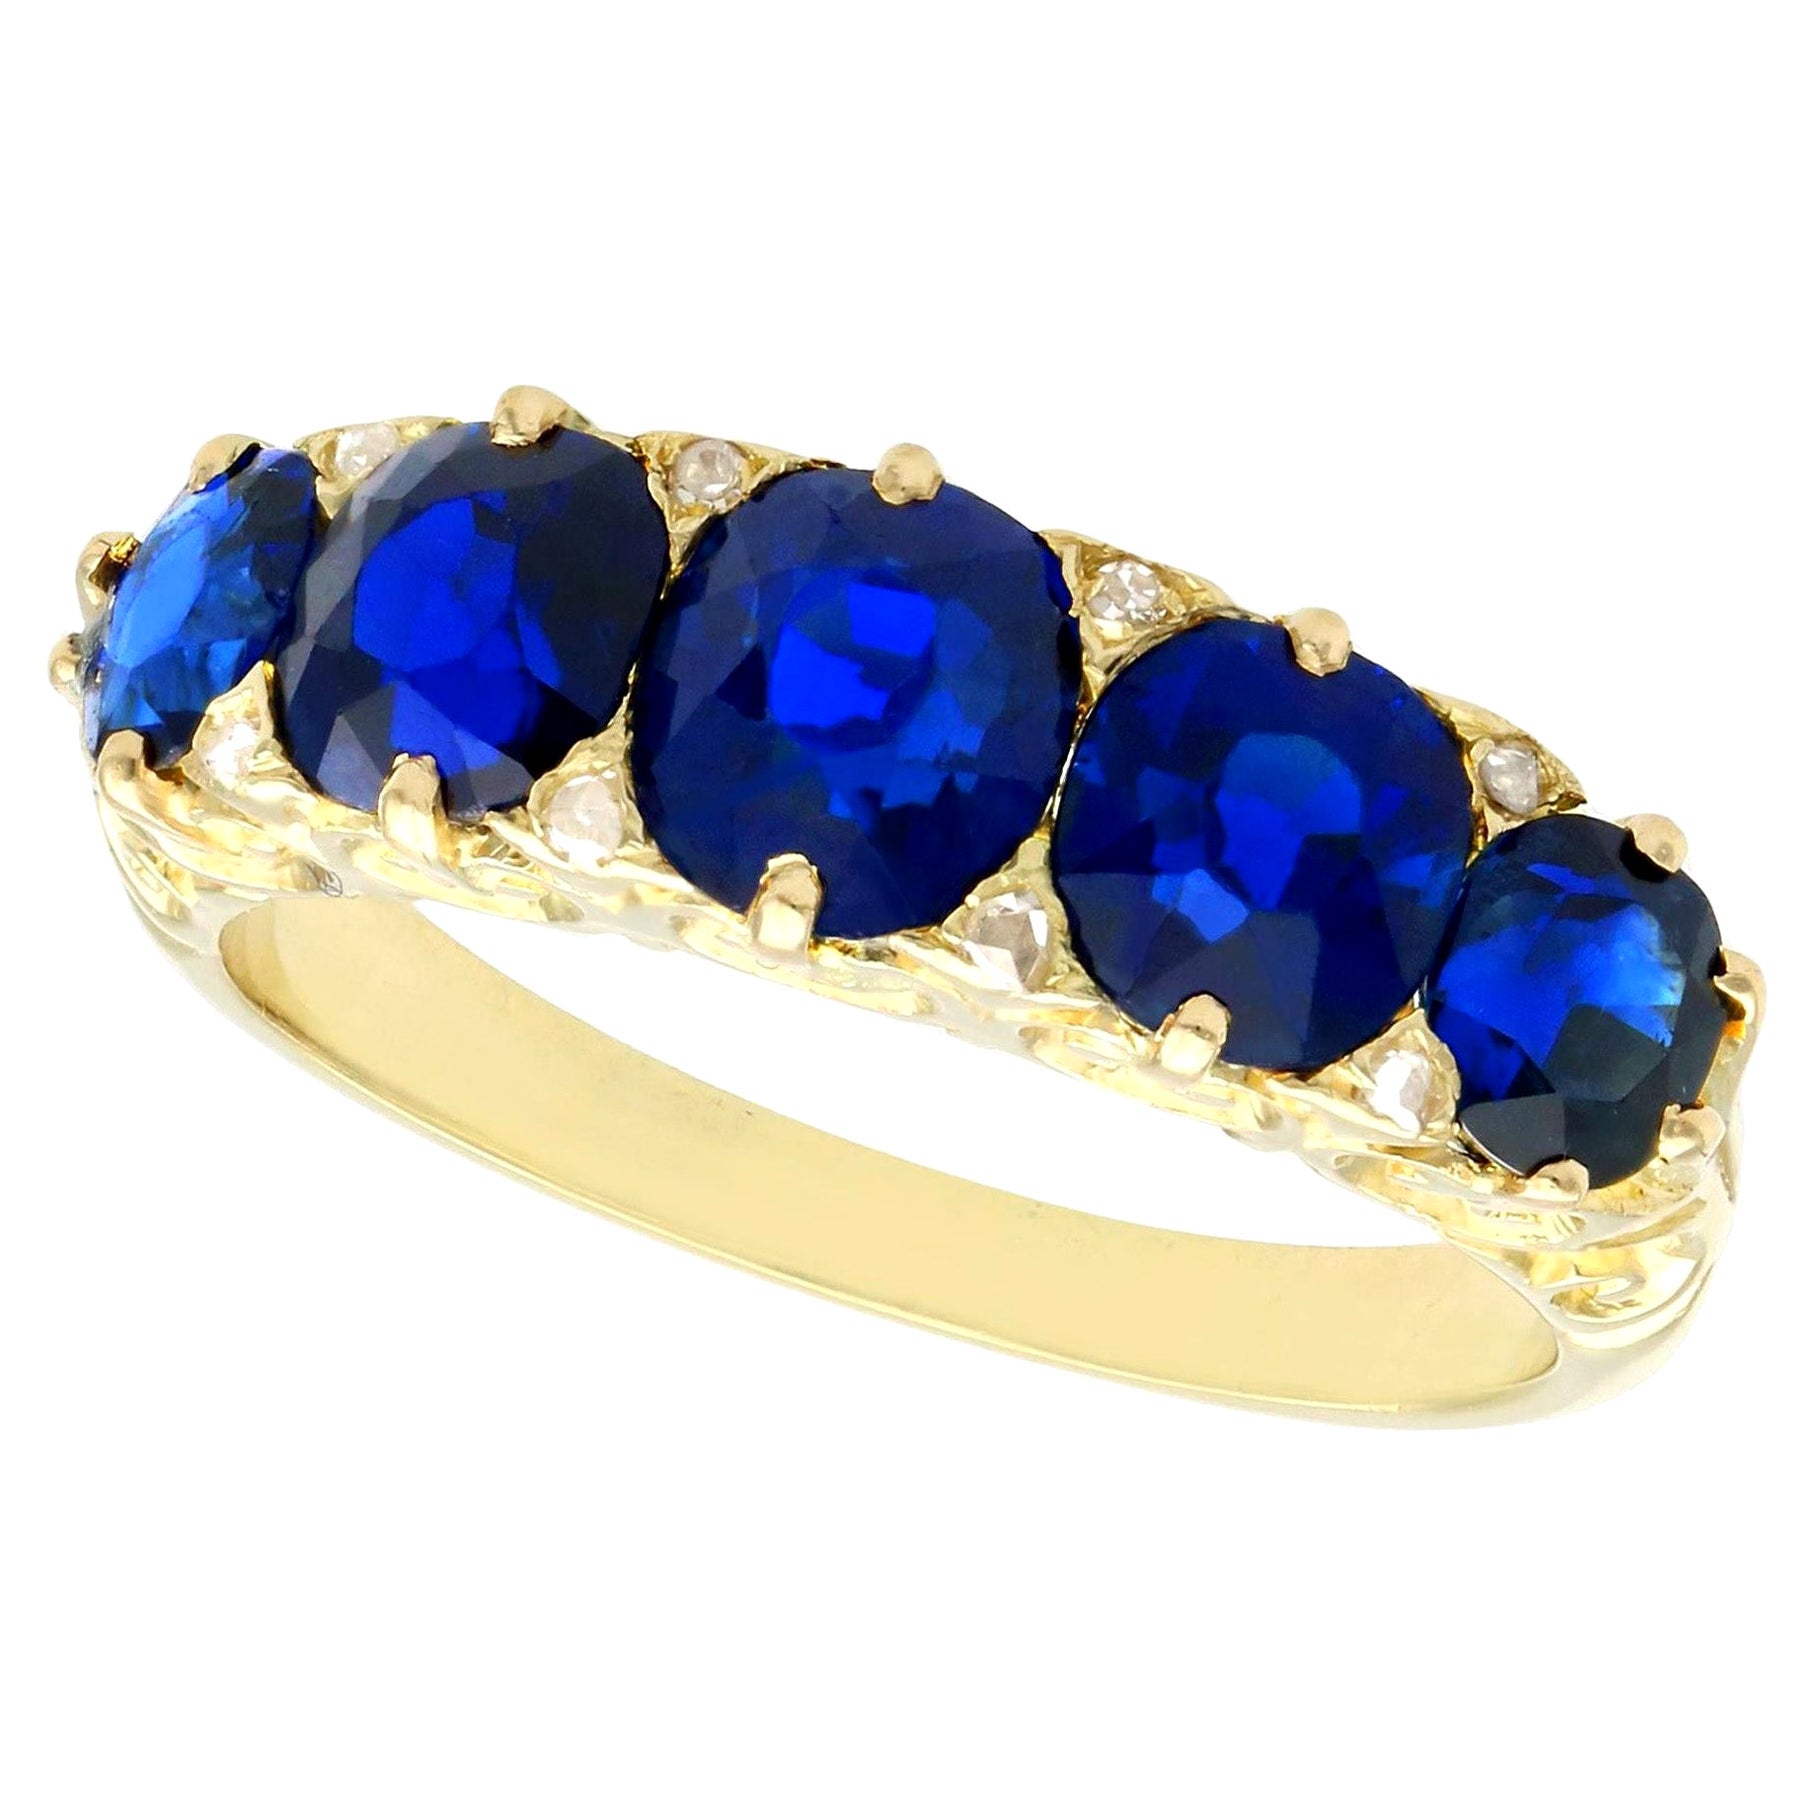 Antique 3.15 Carat Basaltic Sapphire and Diamond Five Stone Ring in Yellow Gold For Sale